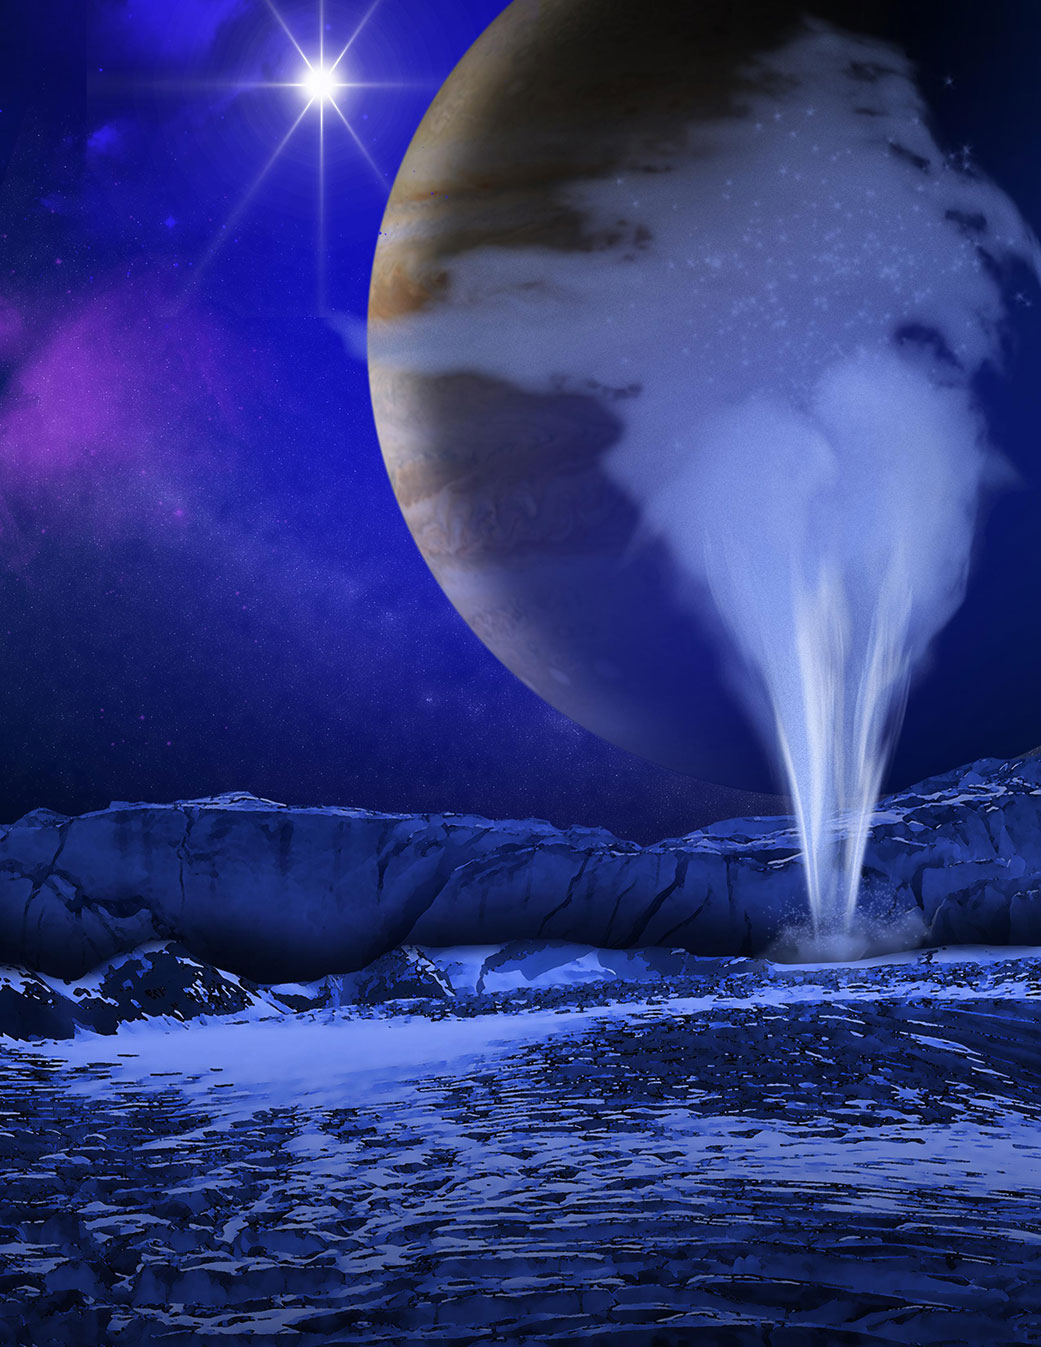 Artist's concept of a plume of water vapor thought to be ejected off the frigid, icy surface of the Jovian moon Europa